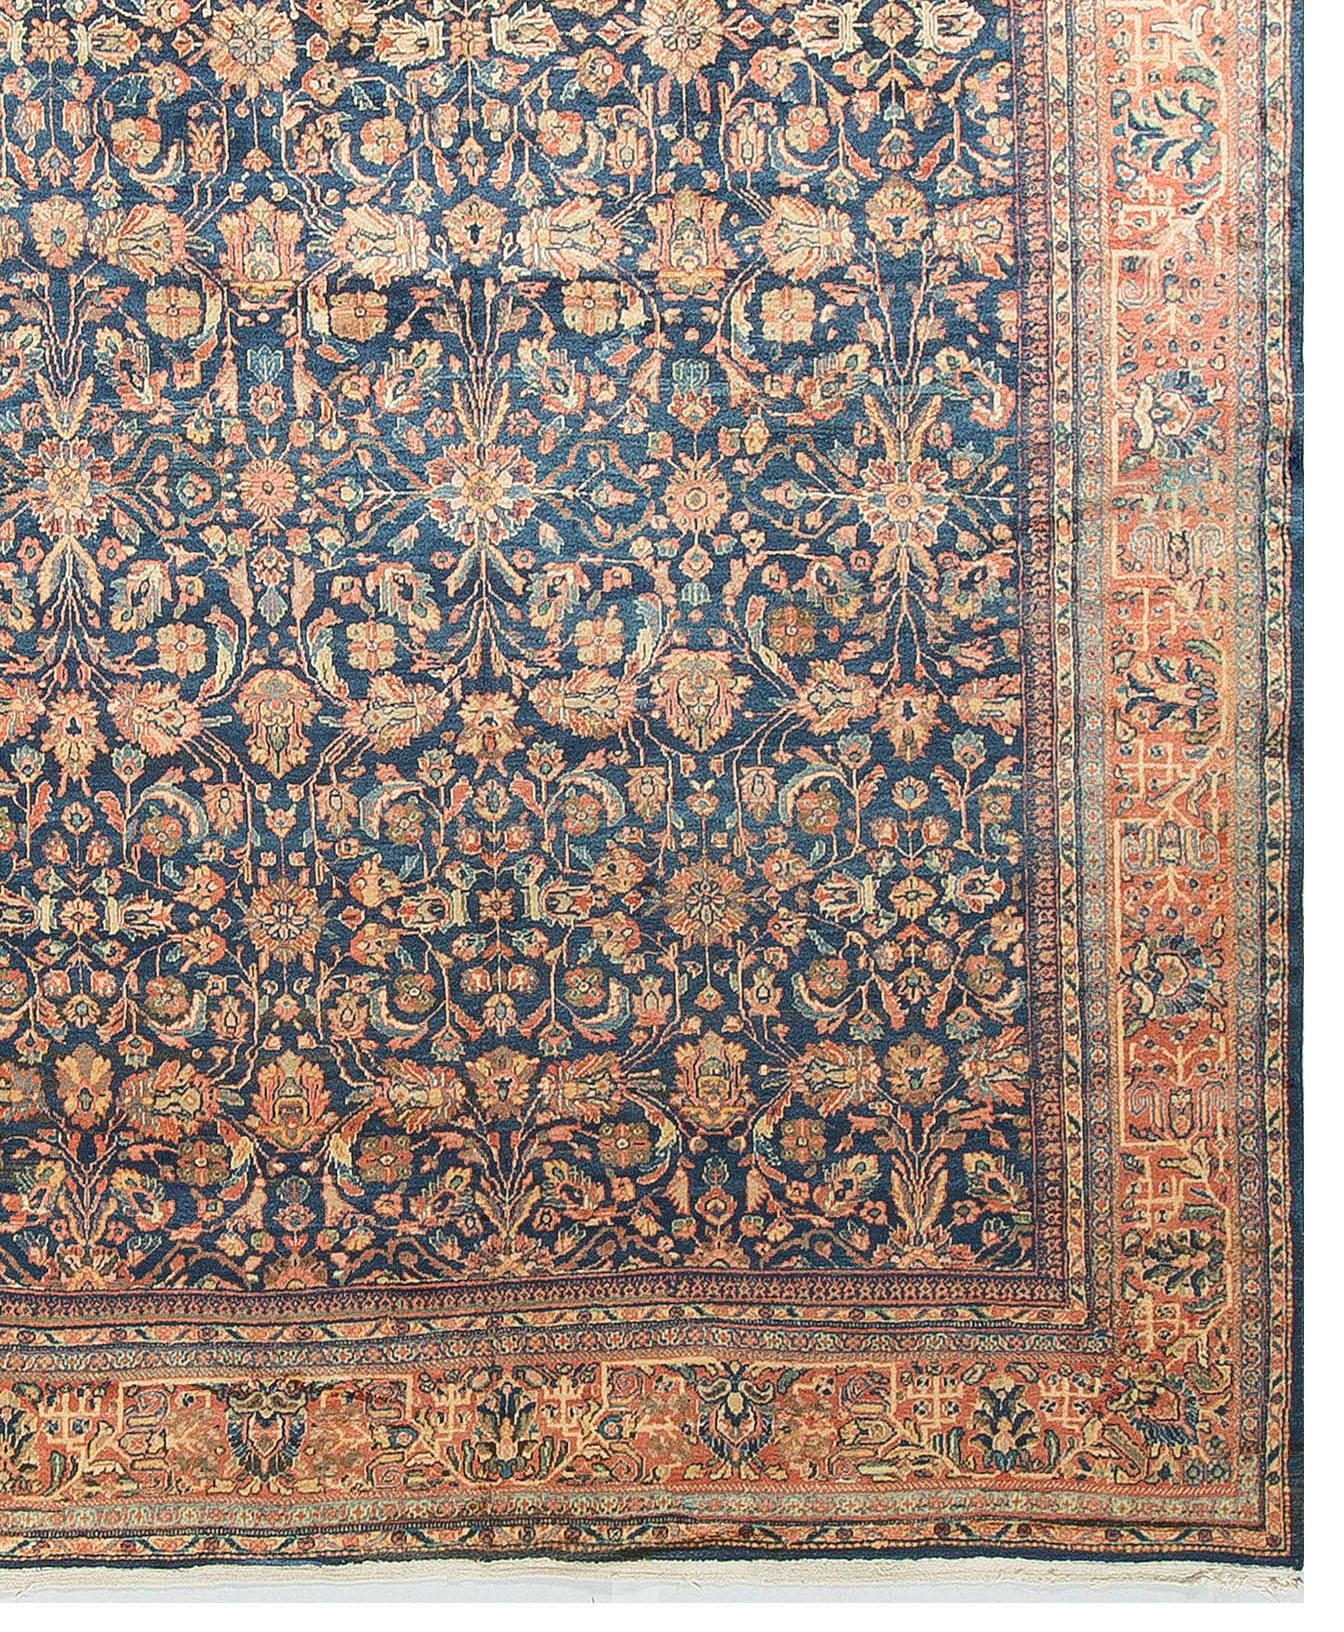 A deep navy field filled with floral designs enclosed by a rust border continuing the floral designs creates this elegant antique hand woven Persian Ziegler rug.